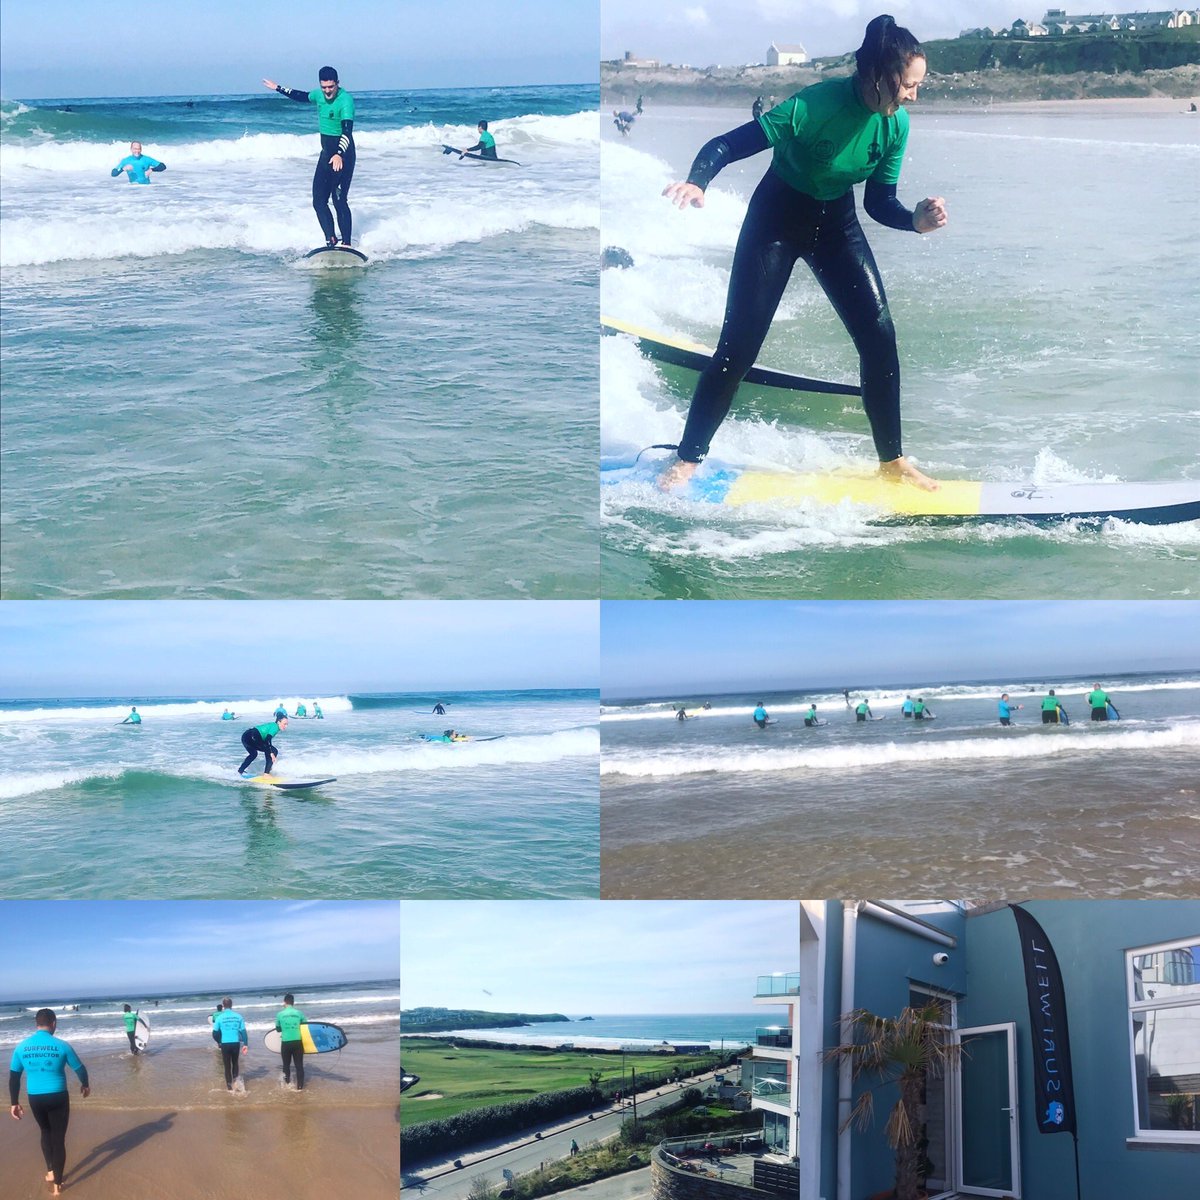 Just completed our @opsurfwell team day…just what we all needed…surf, stress relief and support…thank you 🥰 I would encourage all supervisors to get their teams onto one of these days…too many benefits to mention #surftherapy #coldwatertherapy #vitaminsea